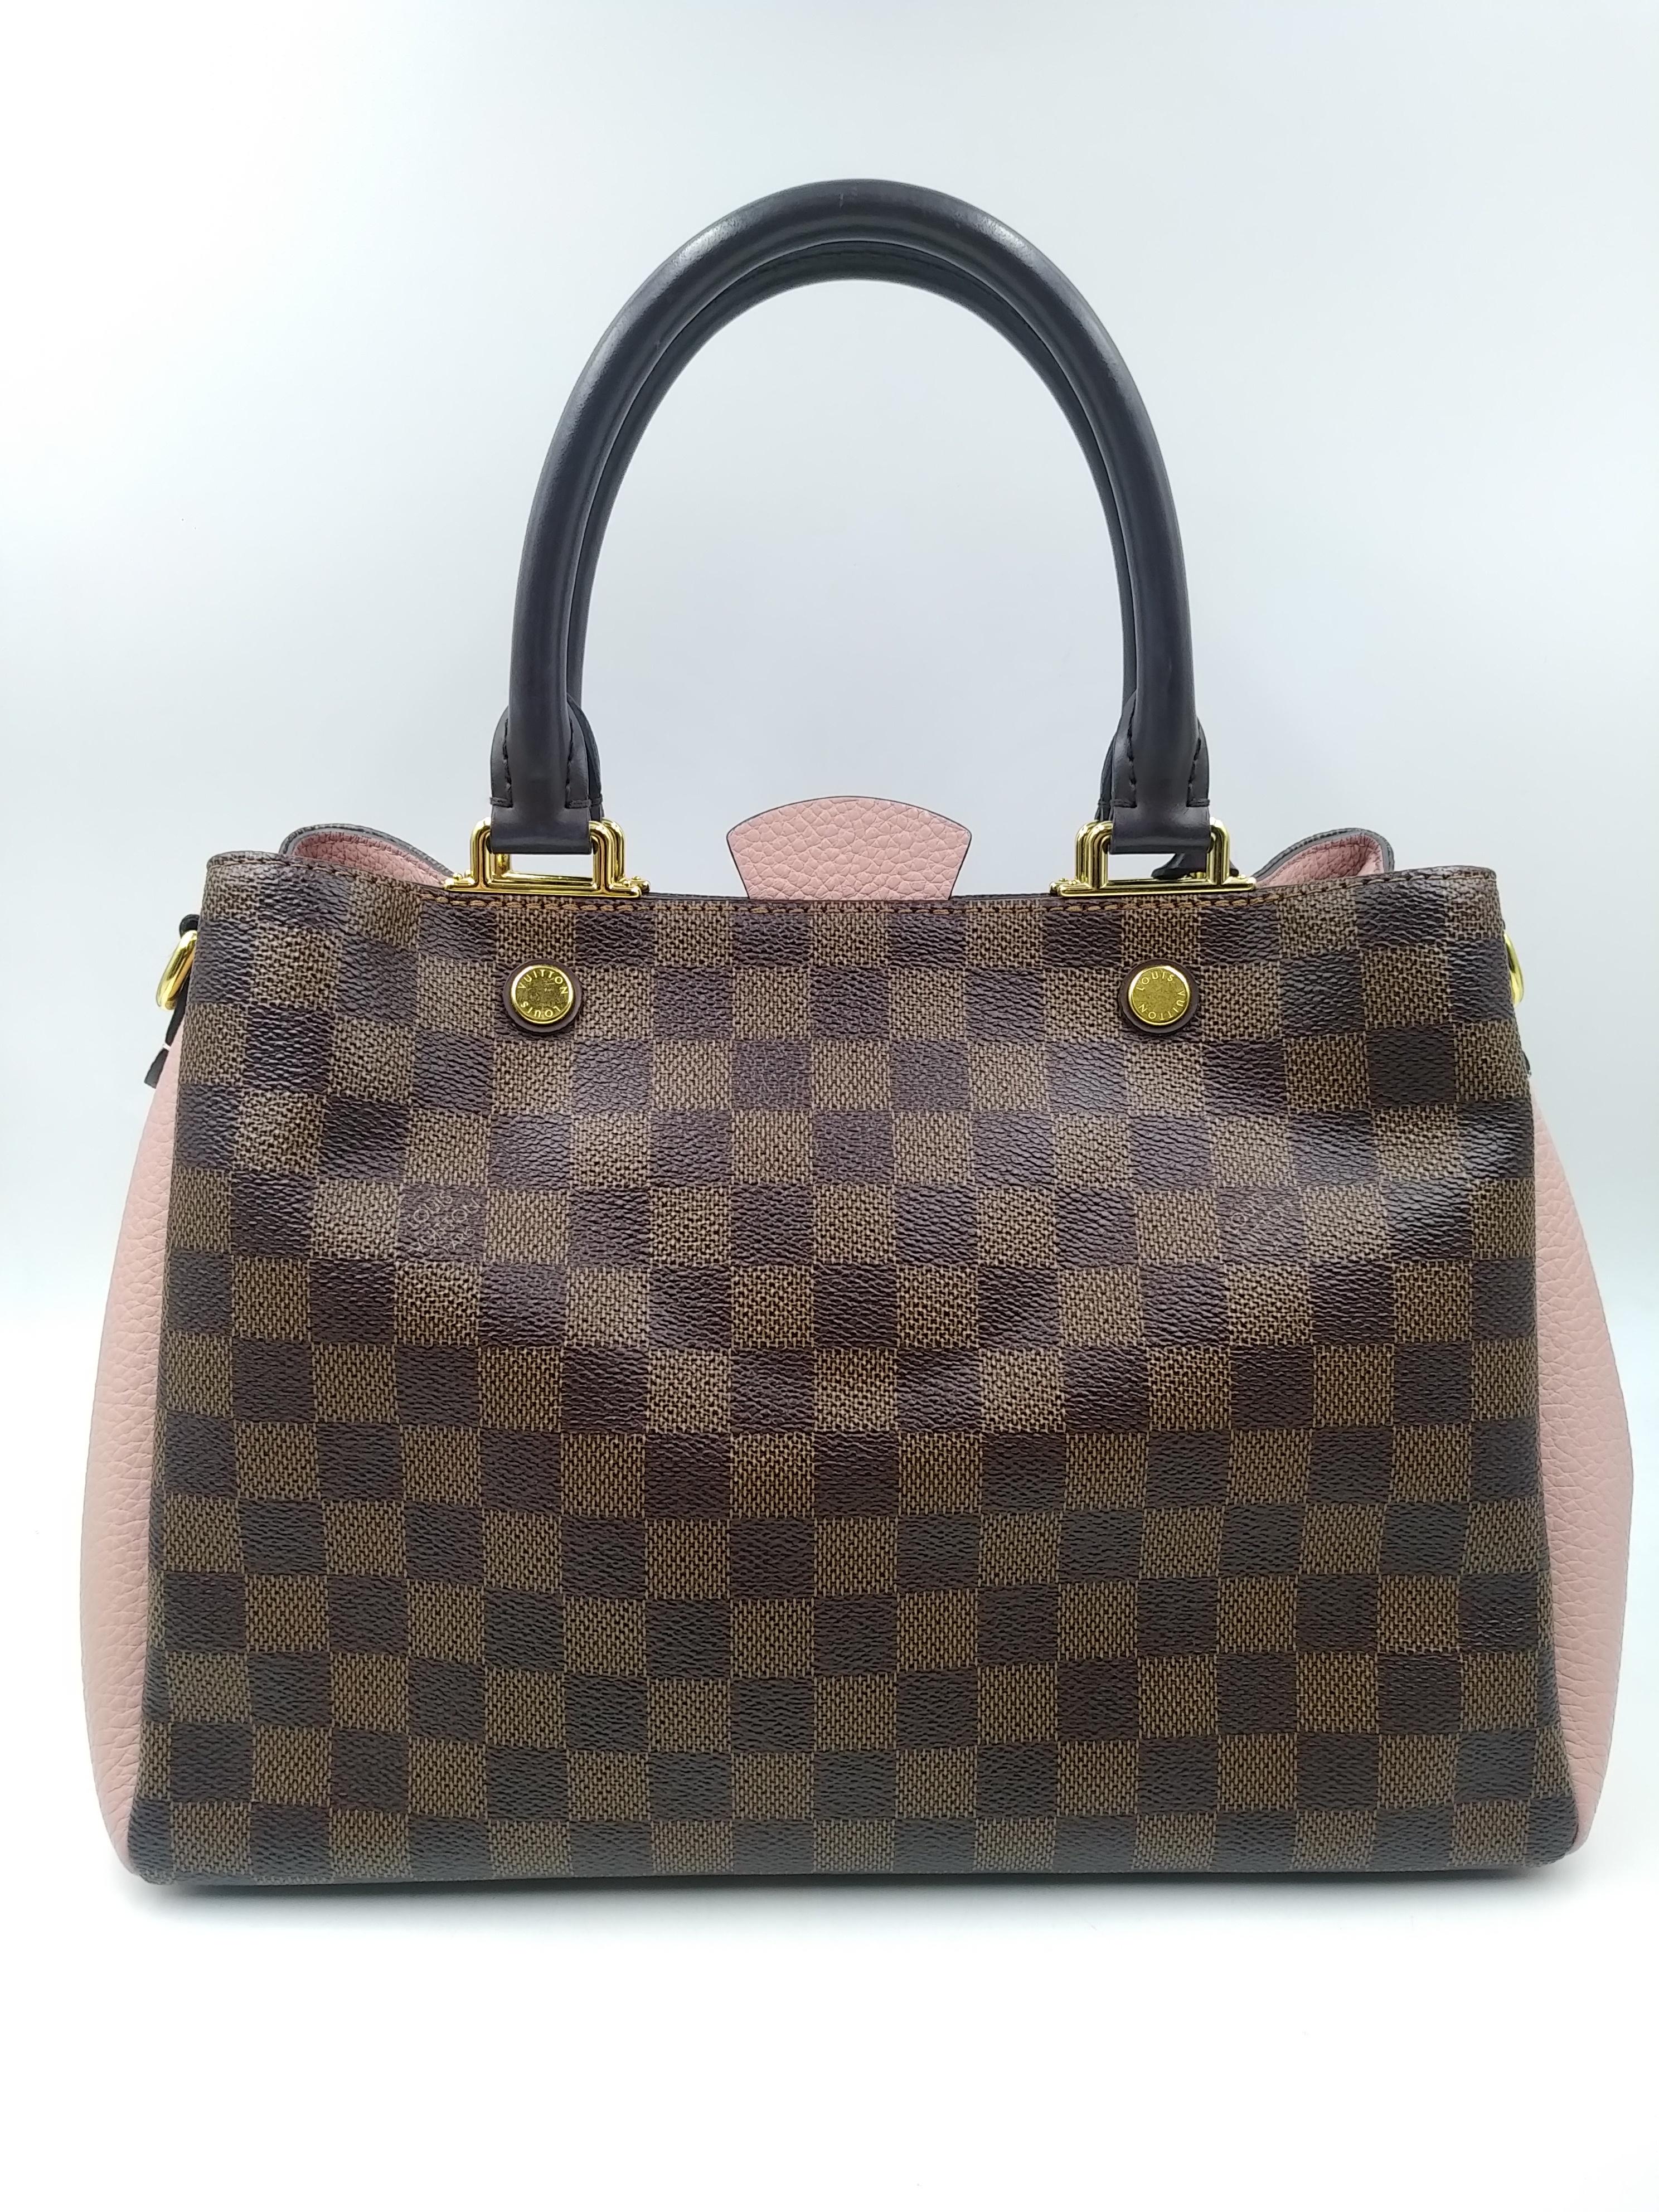 Louis Vuitton Magnolia Damier Canvas Brittany Bag, 2018
- 100% authentic Louis Vuitton
- Damier coated canvas with pebbled leather
- Double rolled leather top handles and a long detachable leather strap
- Open top with middle magnetic snap closure
-